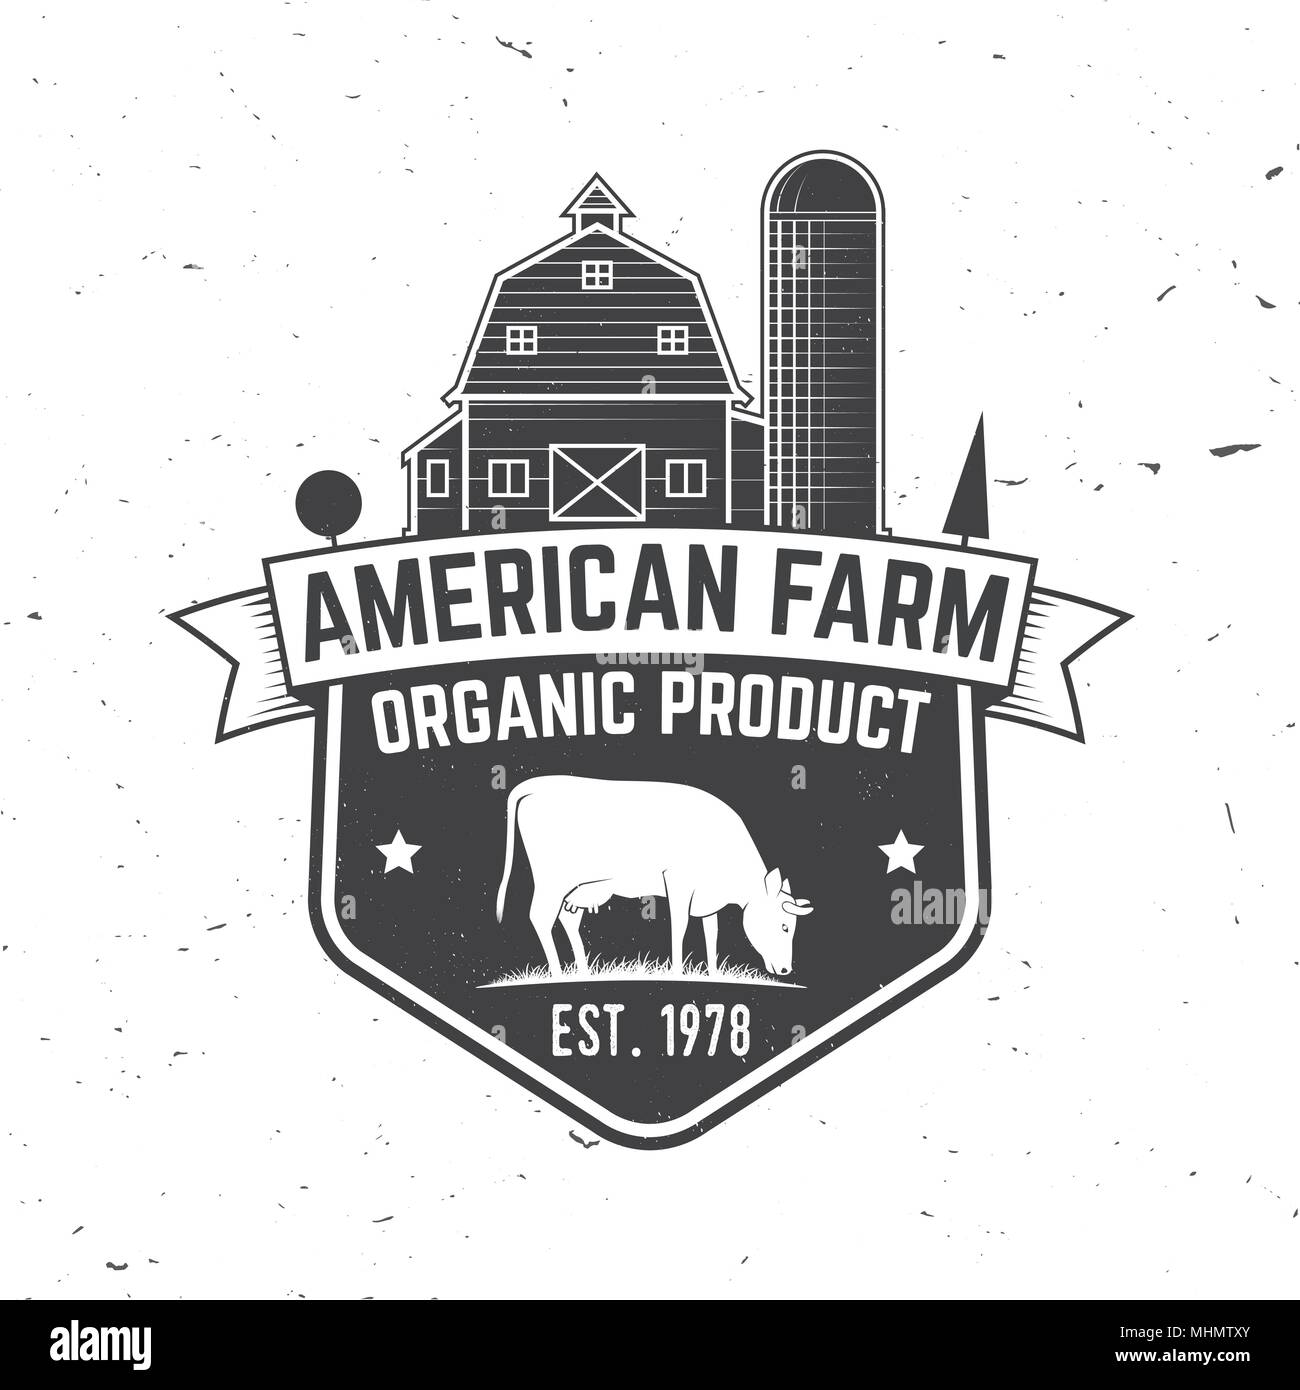 American Farm Badge or Label. Vector illustration. Vintage typography design with cow and farm house silhouette. Elements on the theme of the pork farm business. Stock Vector